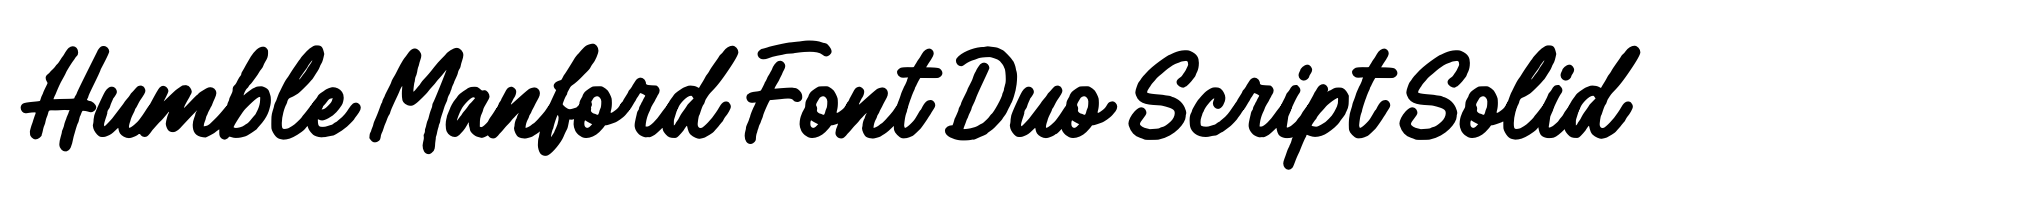 Humble Manford Font Duo Script Solid image